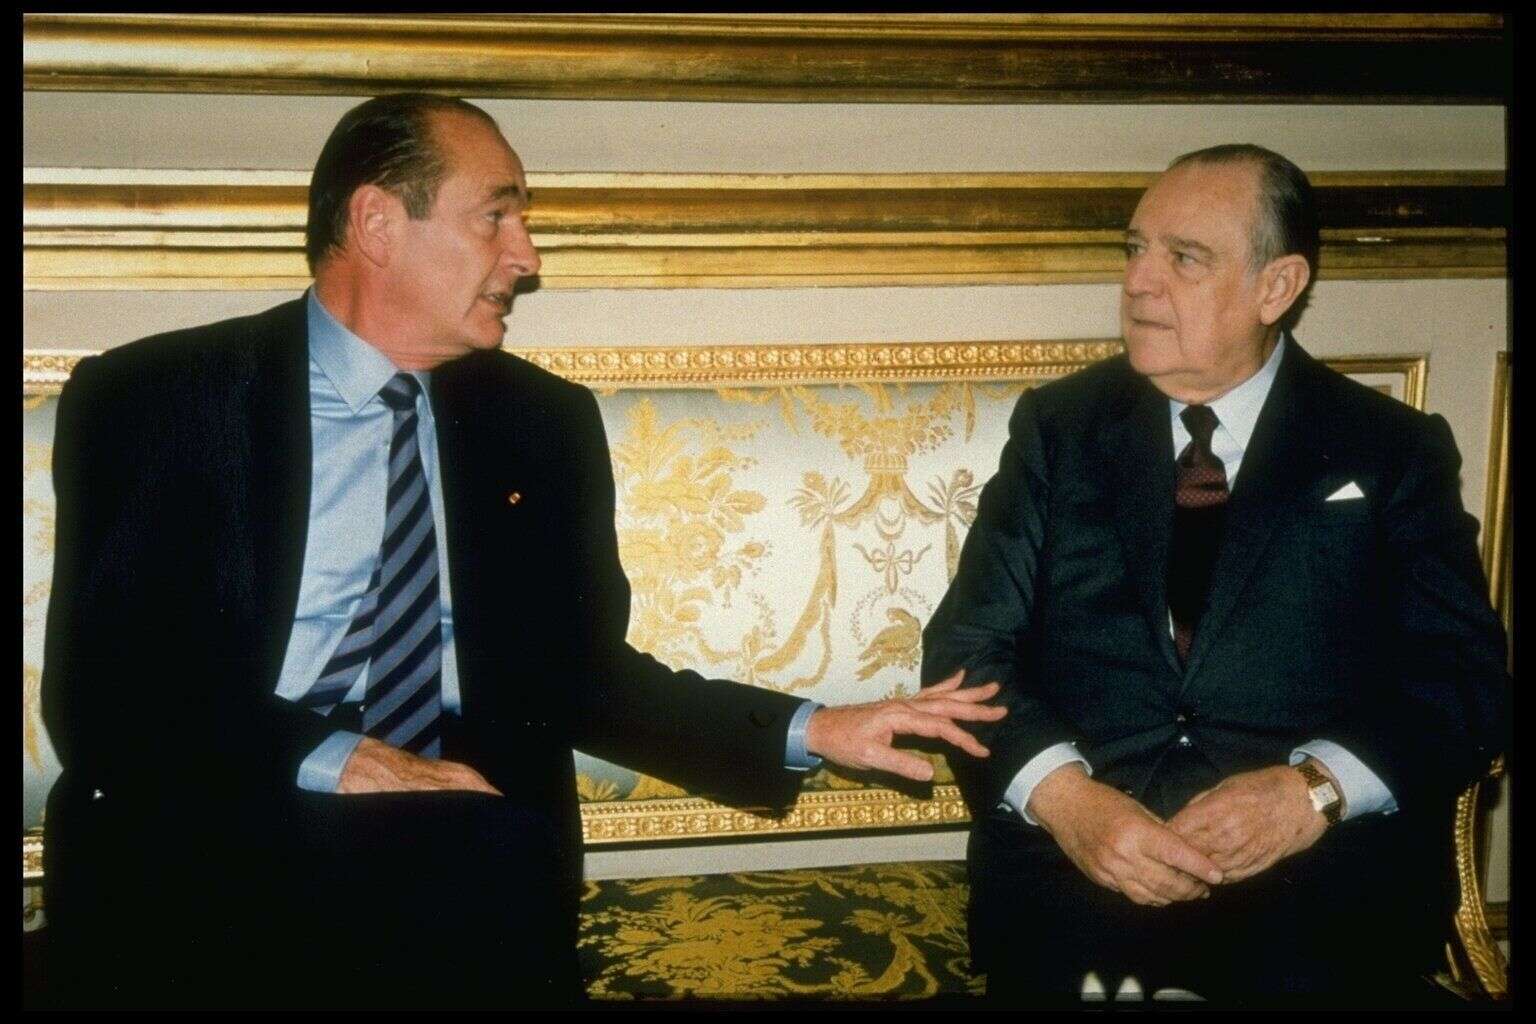 JACQUES CHIRAC RECEIVES RAYMOND BARRE AT THE ELYSEE (Photo by Yves Forestier/Sygma via Getty Images)